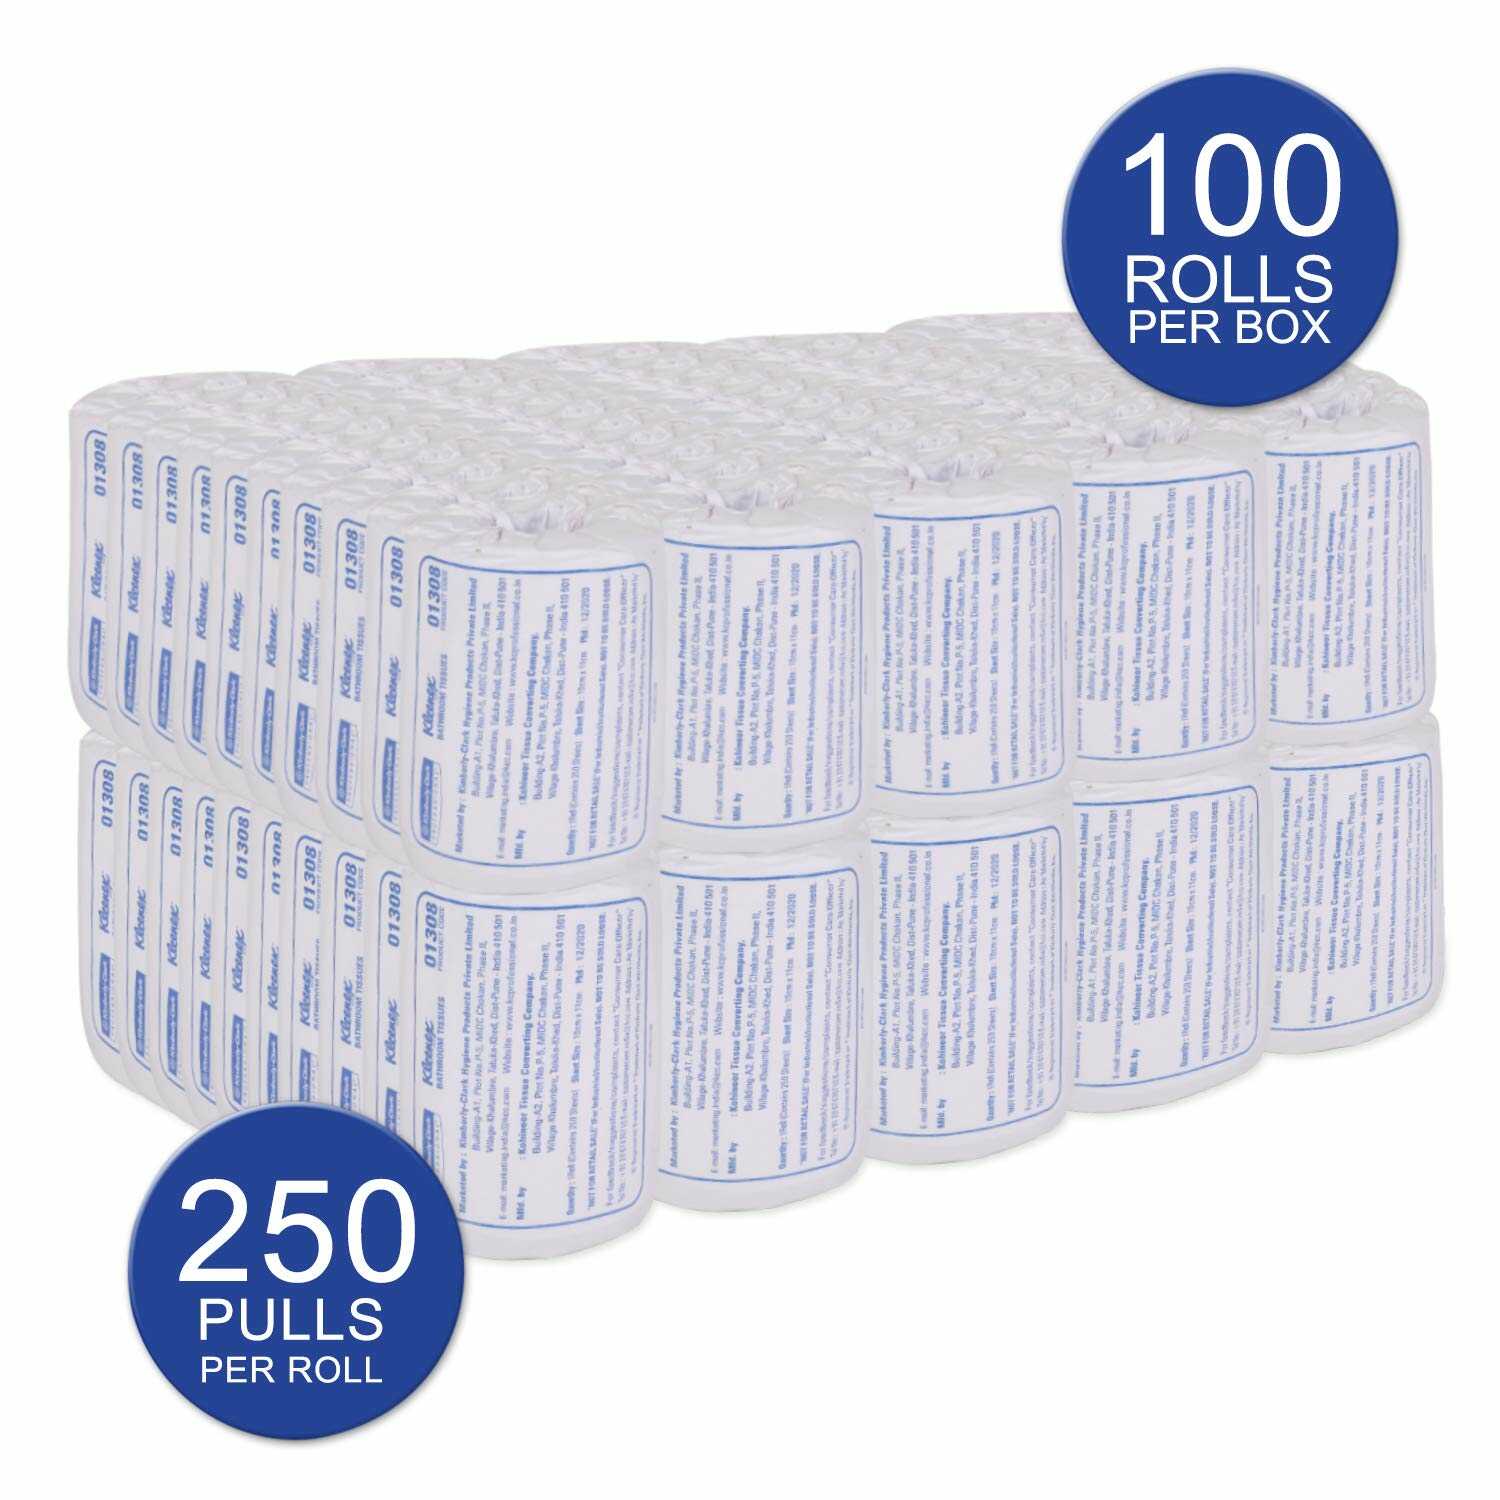 Kimberly Clark* Kleenex* Bathroom Tissue Roll, 1308 (Pack of 100 Rolls/Case, 250 Sheets/Pack, Total 25,000 Sheets )